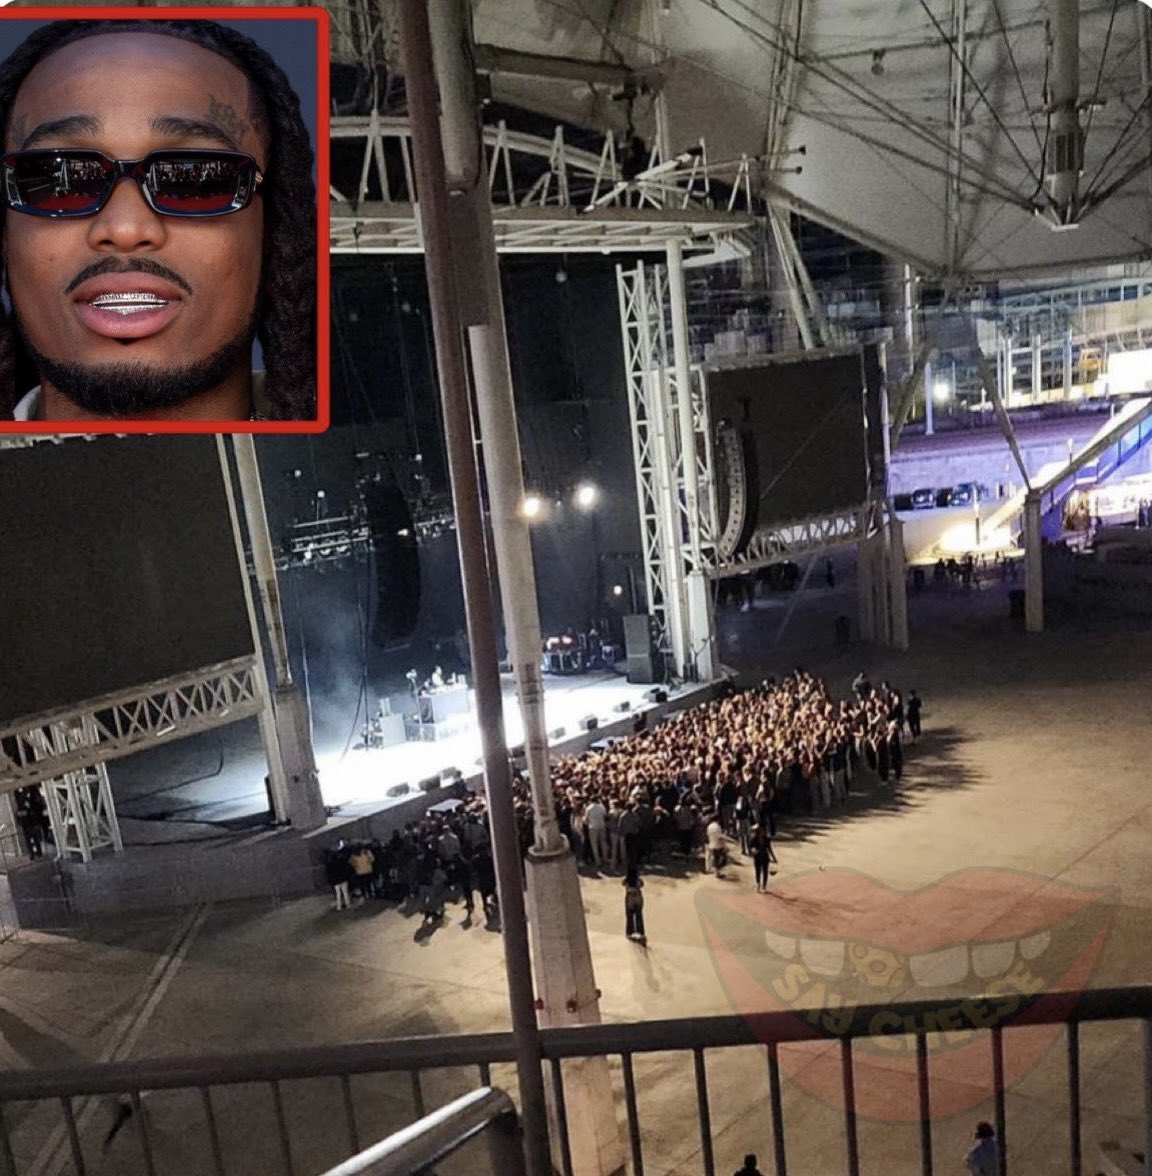 American music industry is fucked up. See what  they did to Quavo concert

Omo this is some dip shit💔💔💔